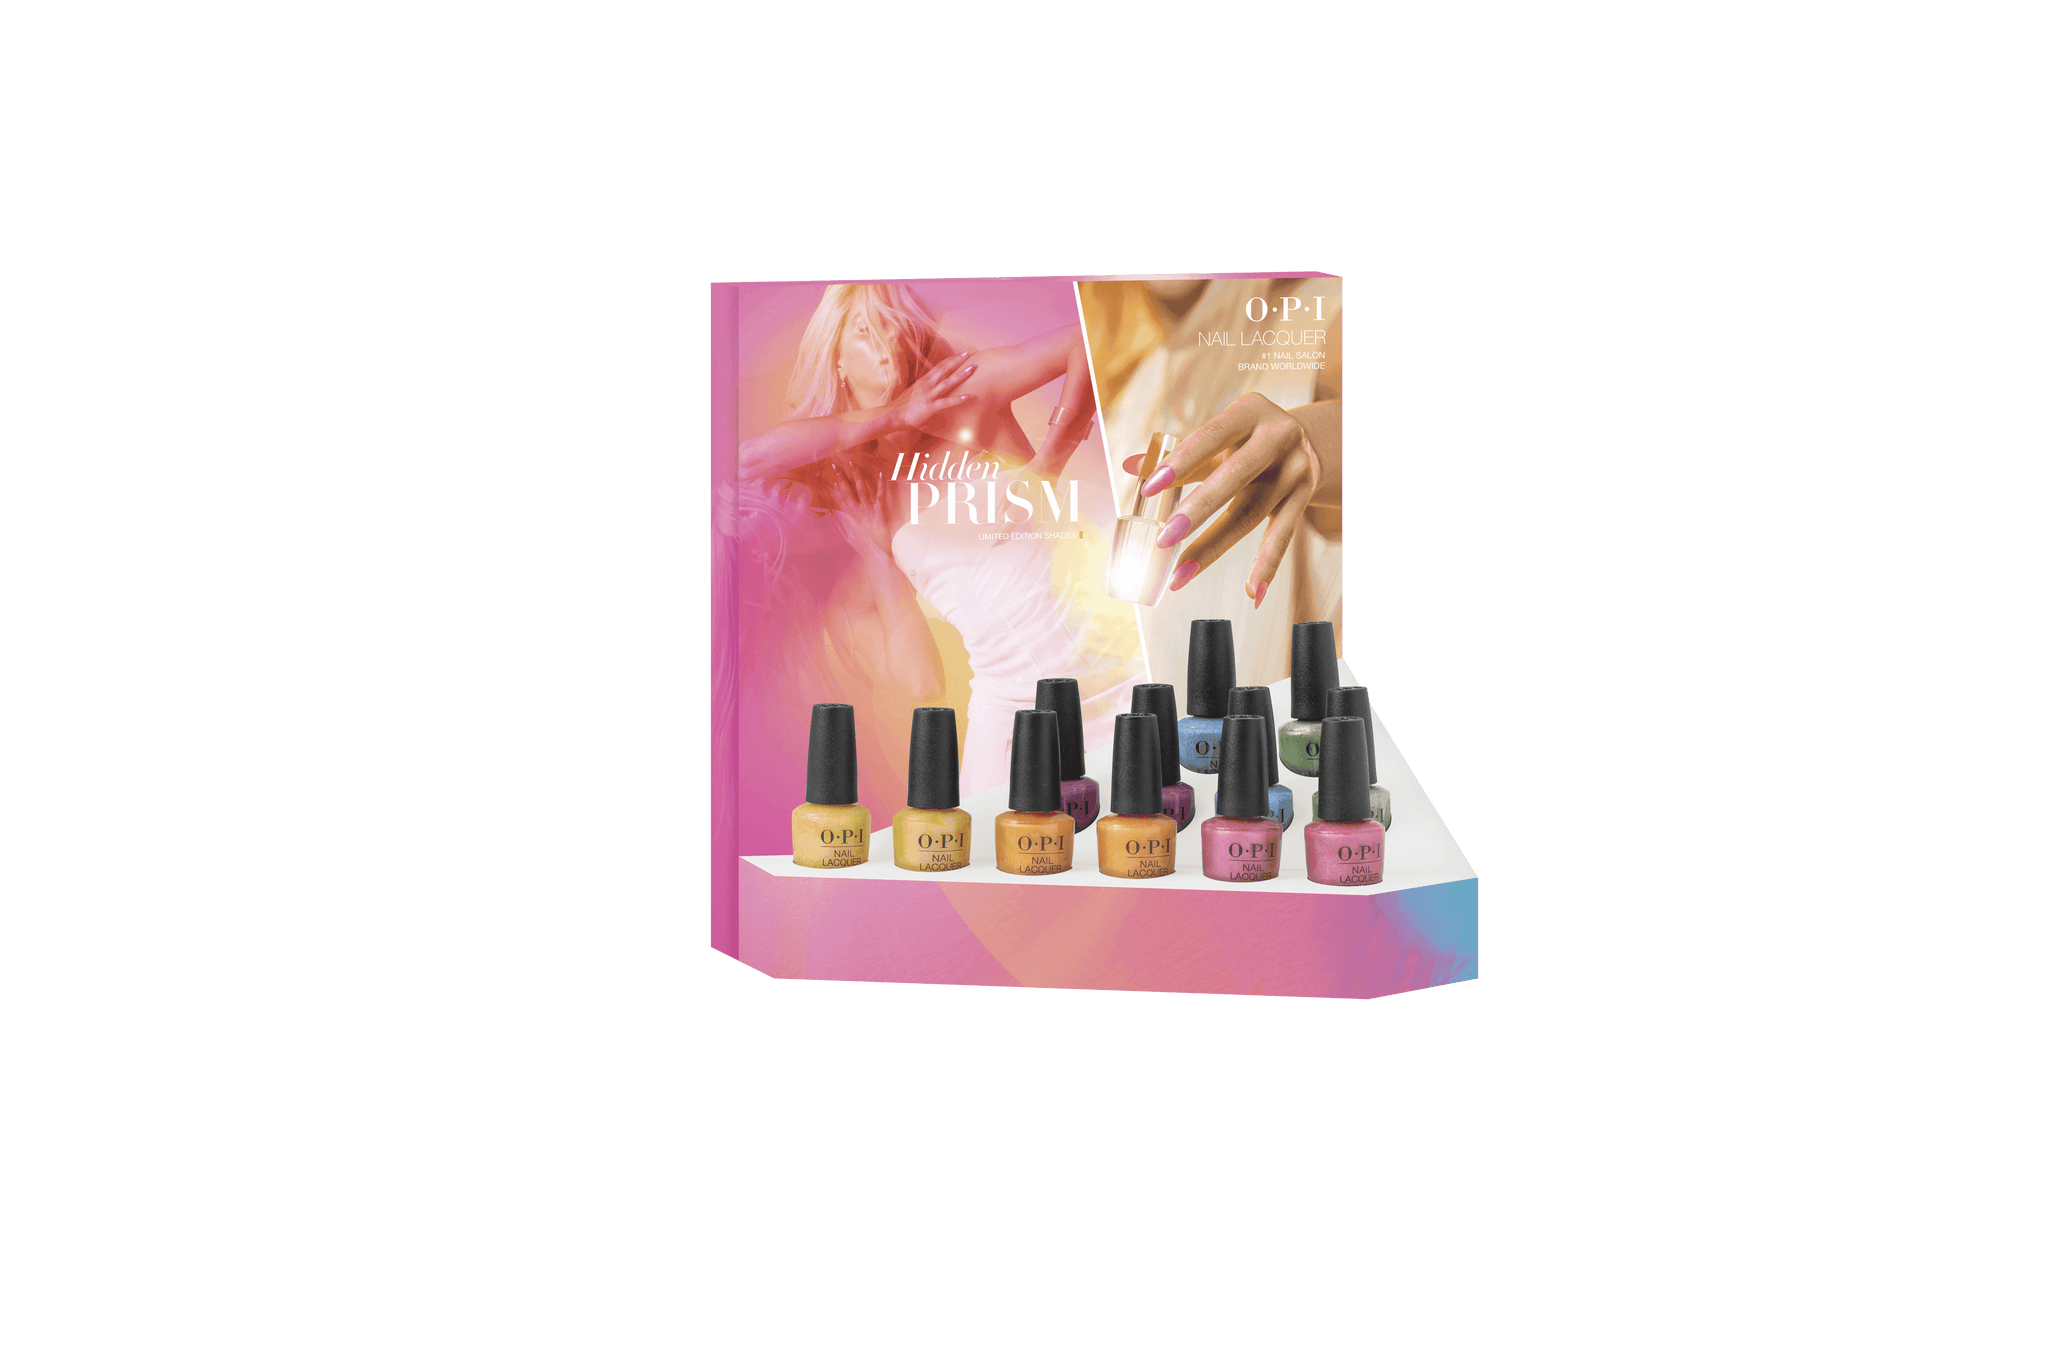 OPI Nail Lacquer - Hidden Prism 12pc